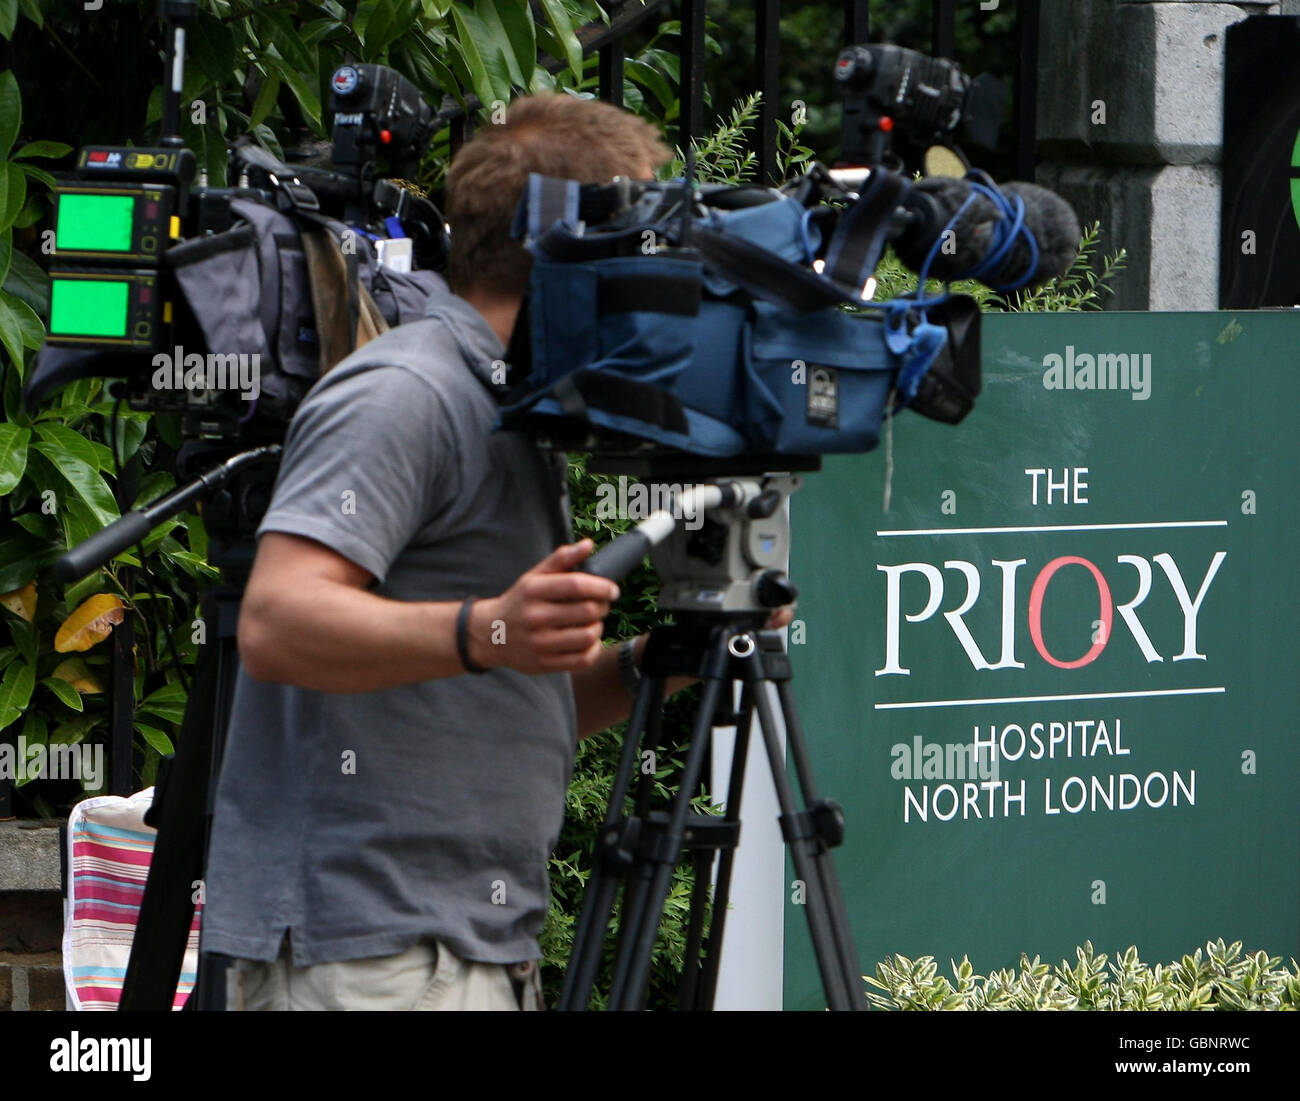 Television crews outside the entrance to The Priory Hospital in north London, where Susan Boyle has been admitted following the final of 'Britain's Got Talent.' Stock Photo